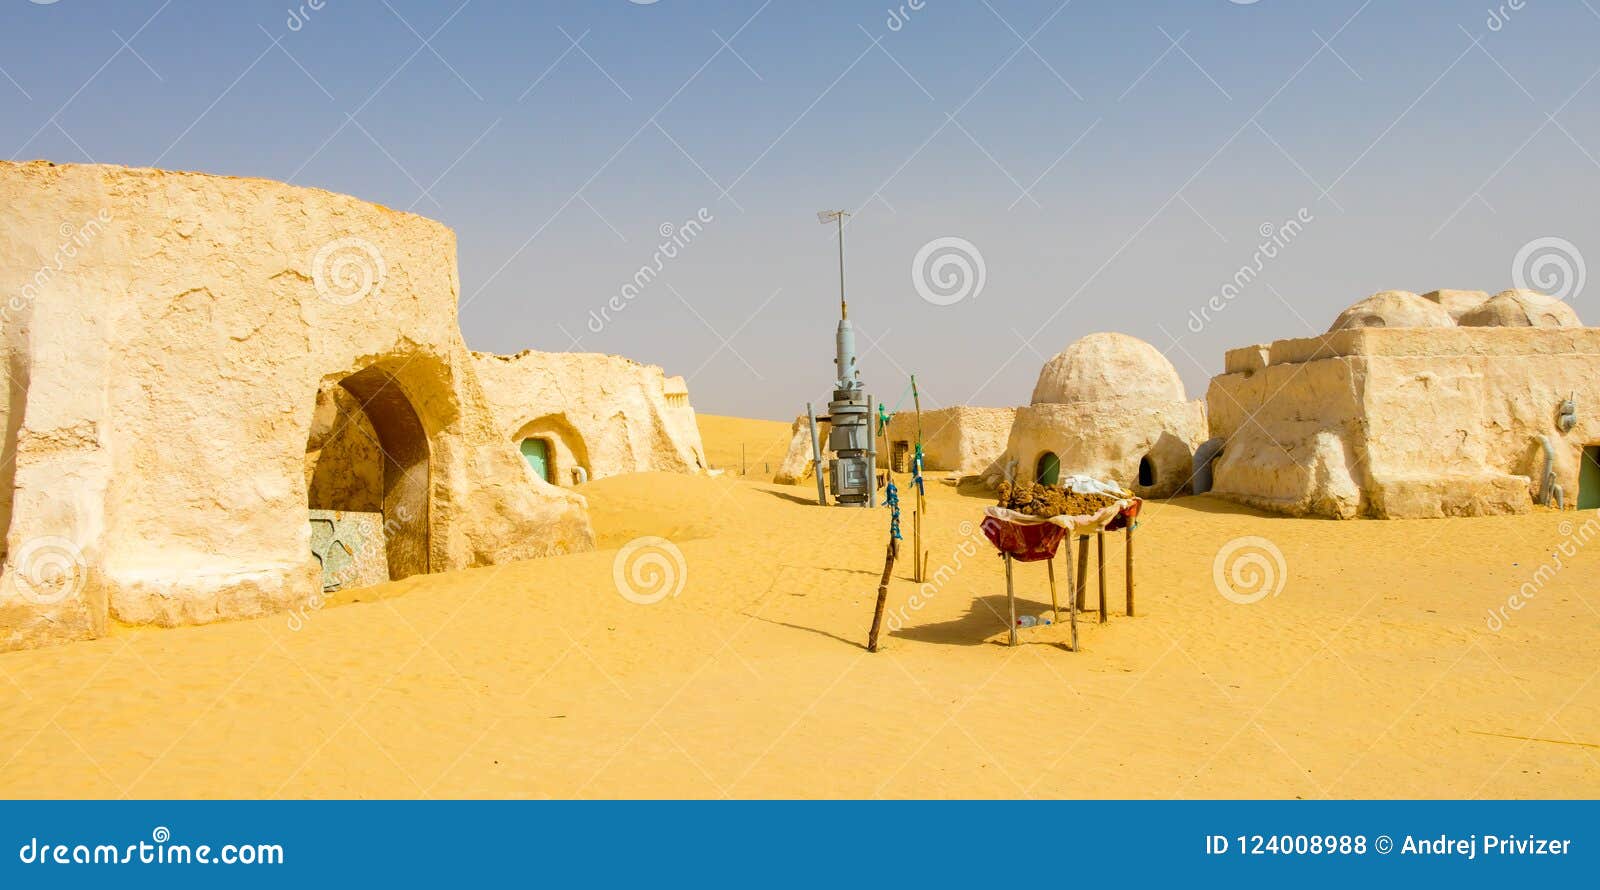 Galaxy Durable Leather Shoes,One of Abandoned Sets of Movie in Tunisia Desert Phantom Menace Galaxy Wars Themed for Women,US 5